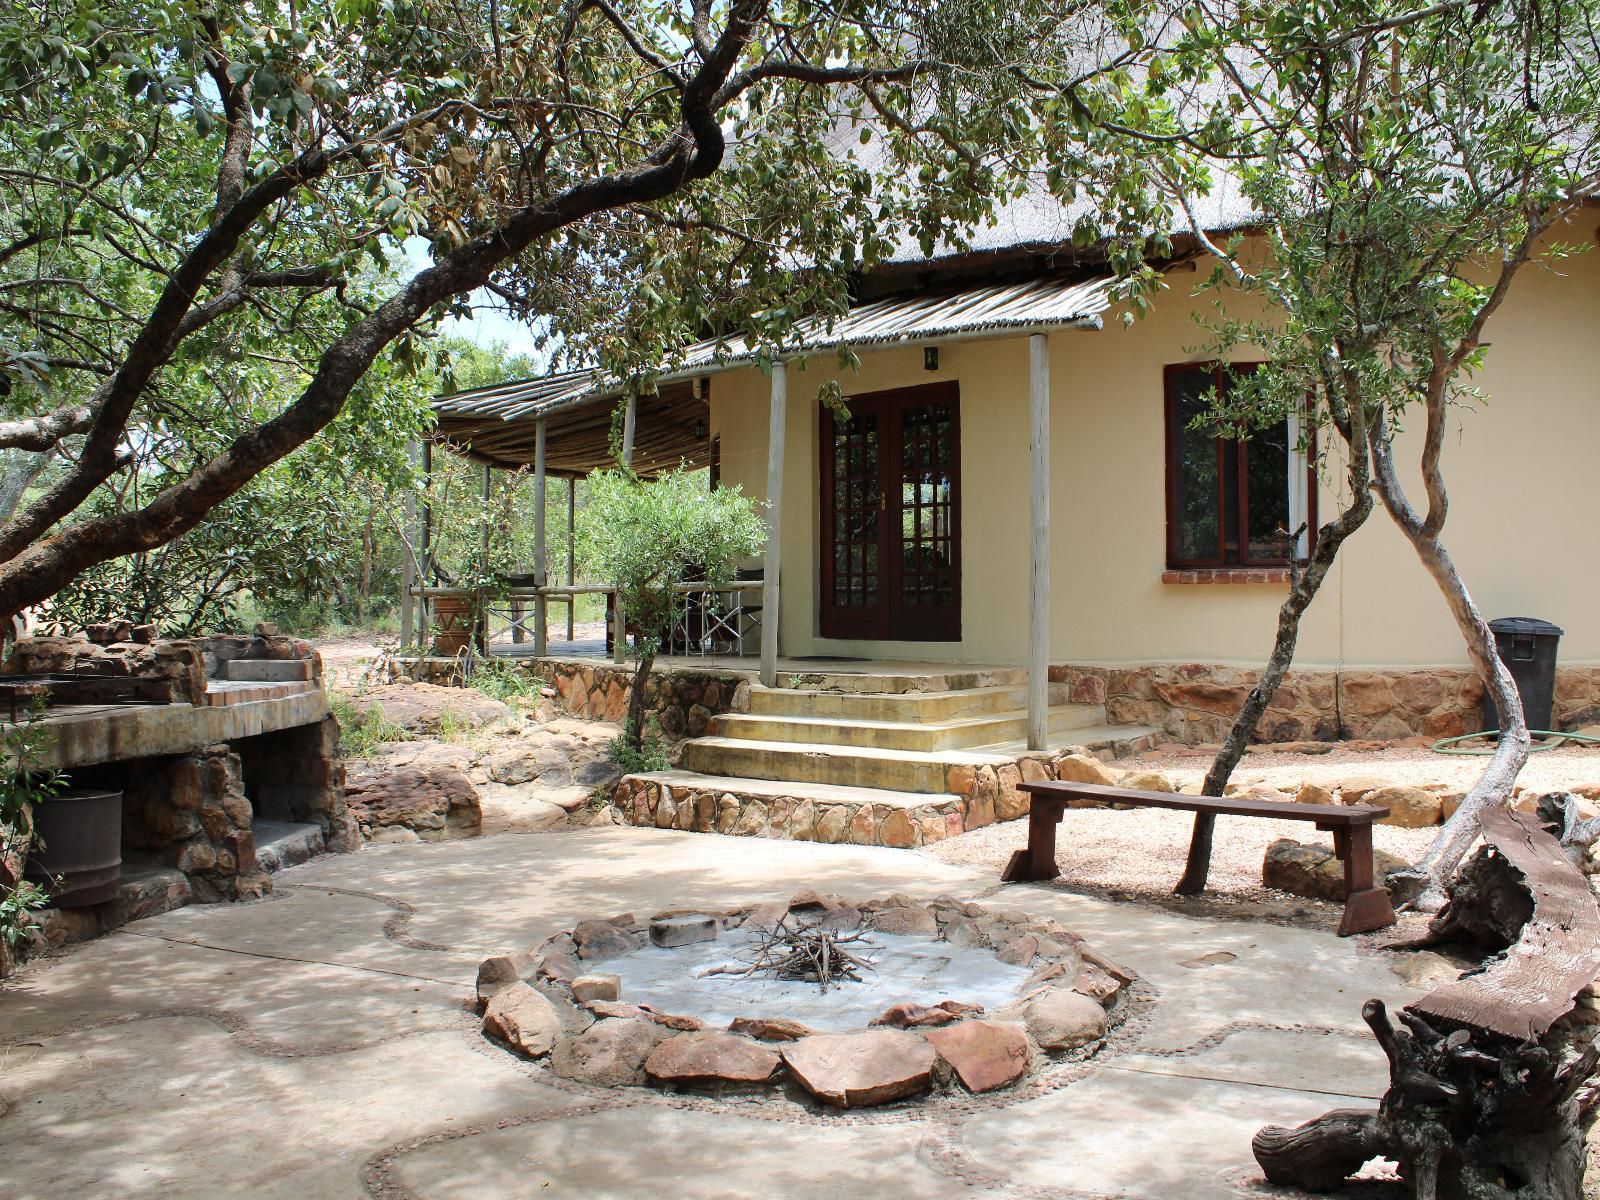 Izintaba Private Game Reserve Vaalwater Limpopo Province South Africa Cabin, Building, Architecture, Reptile, Animal